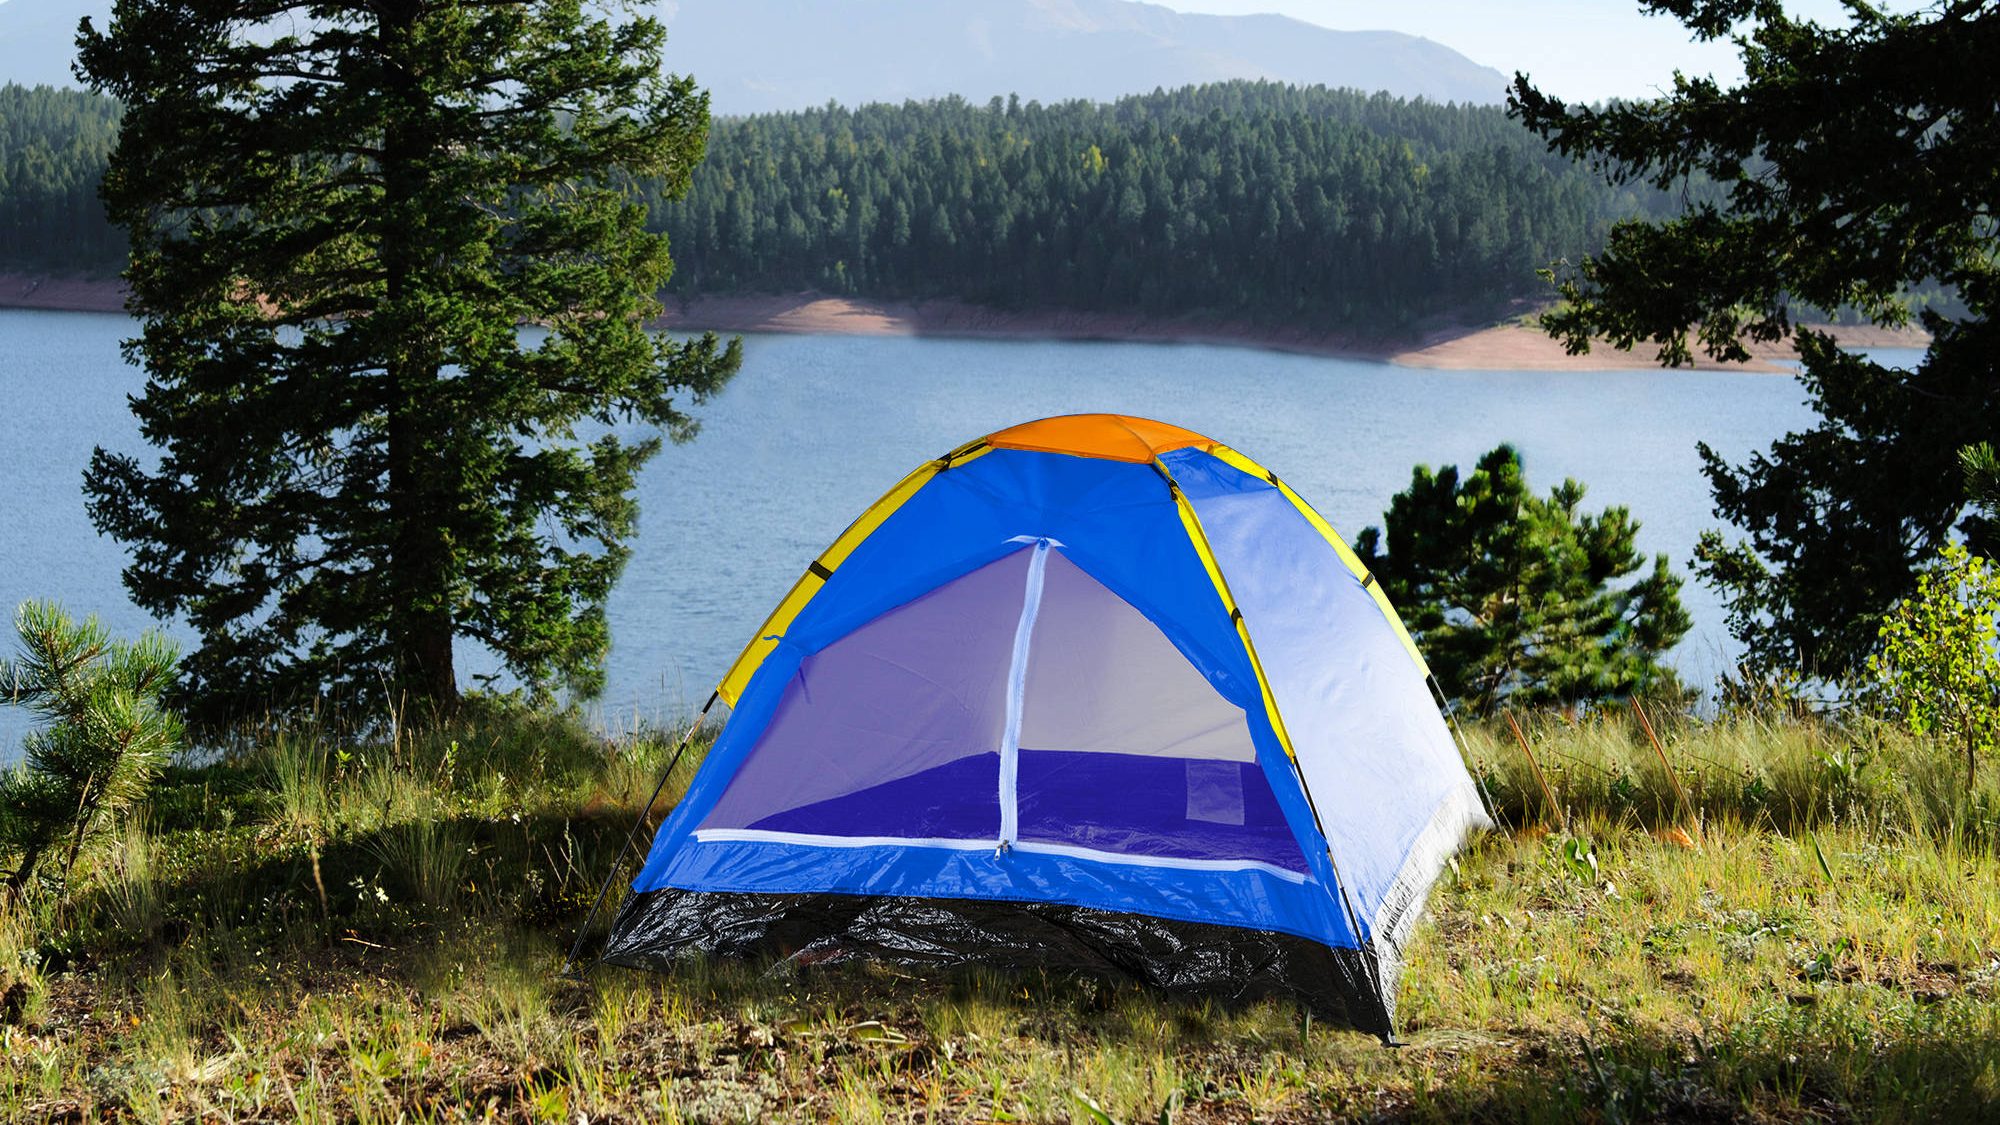 Clearance tents at Walmart from $16